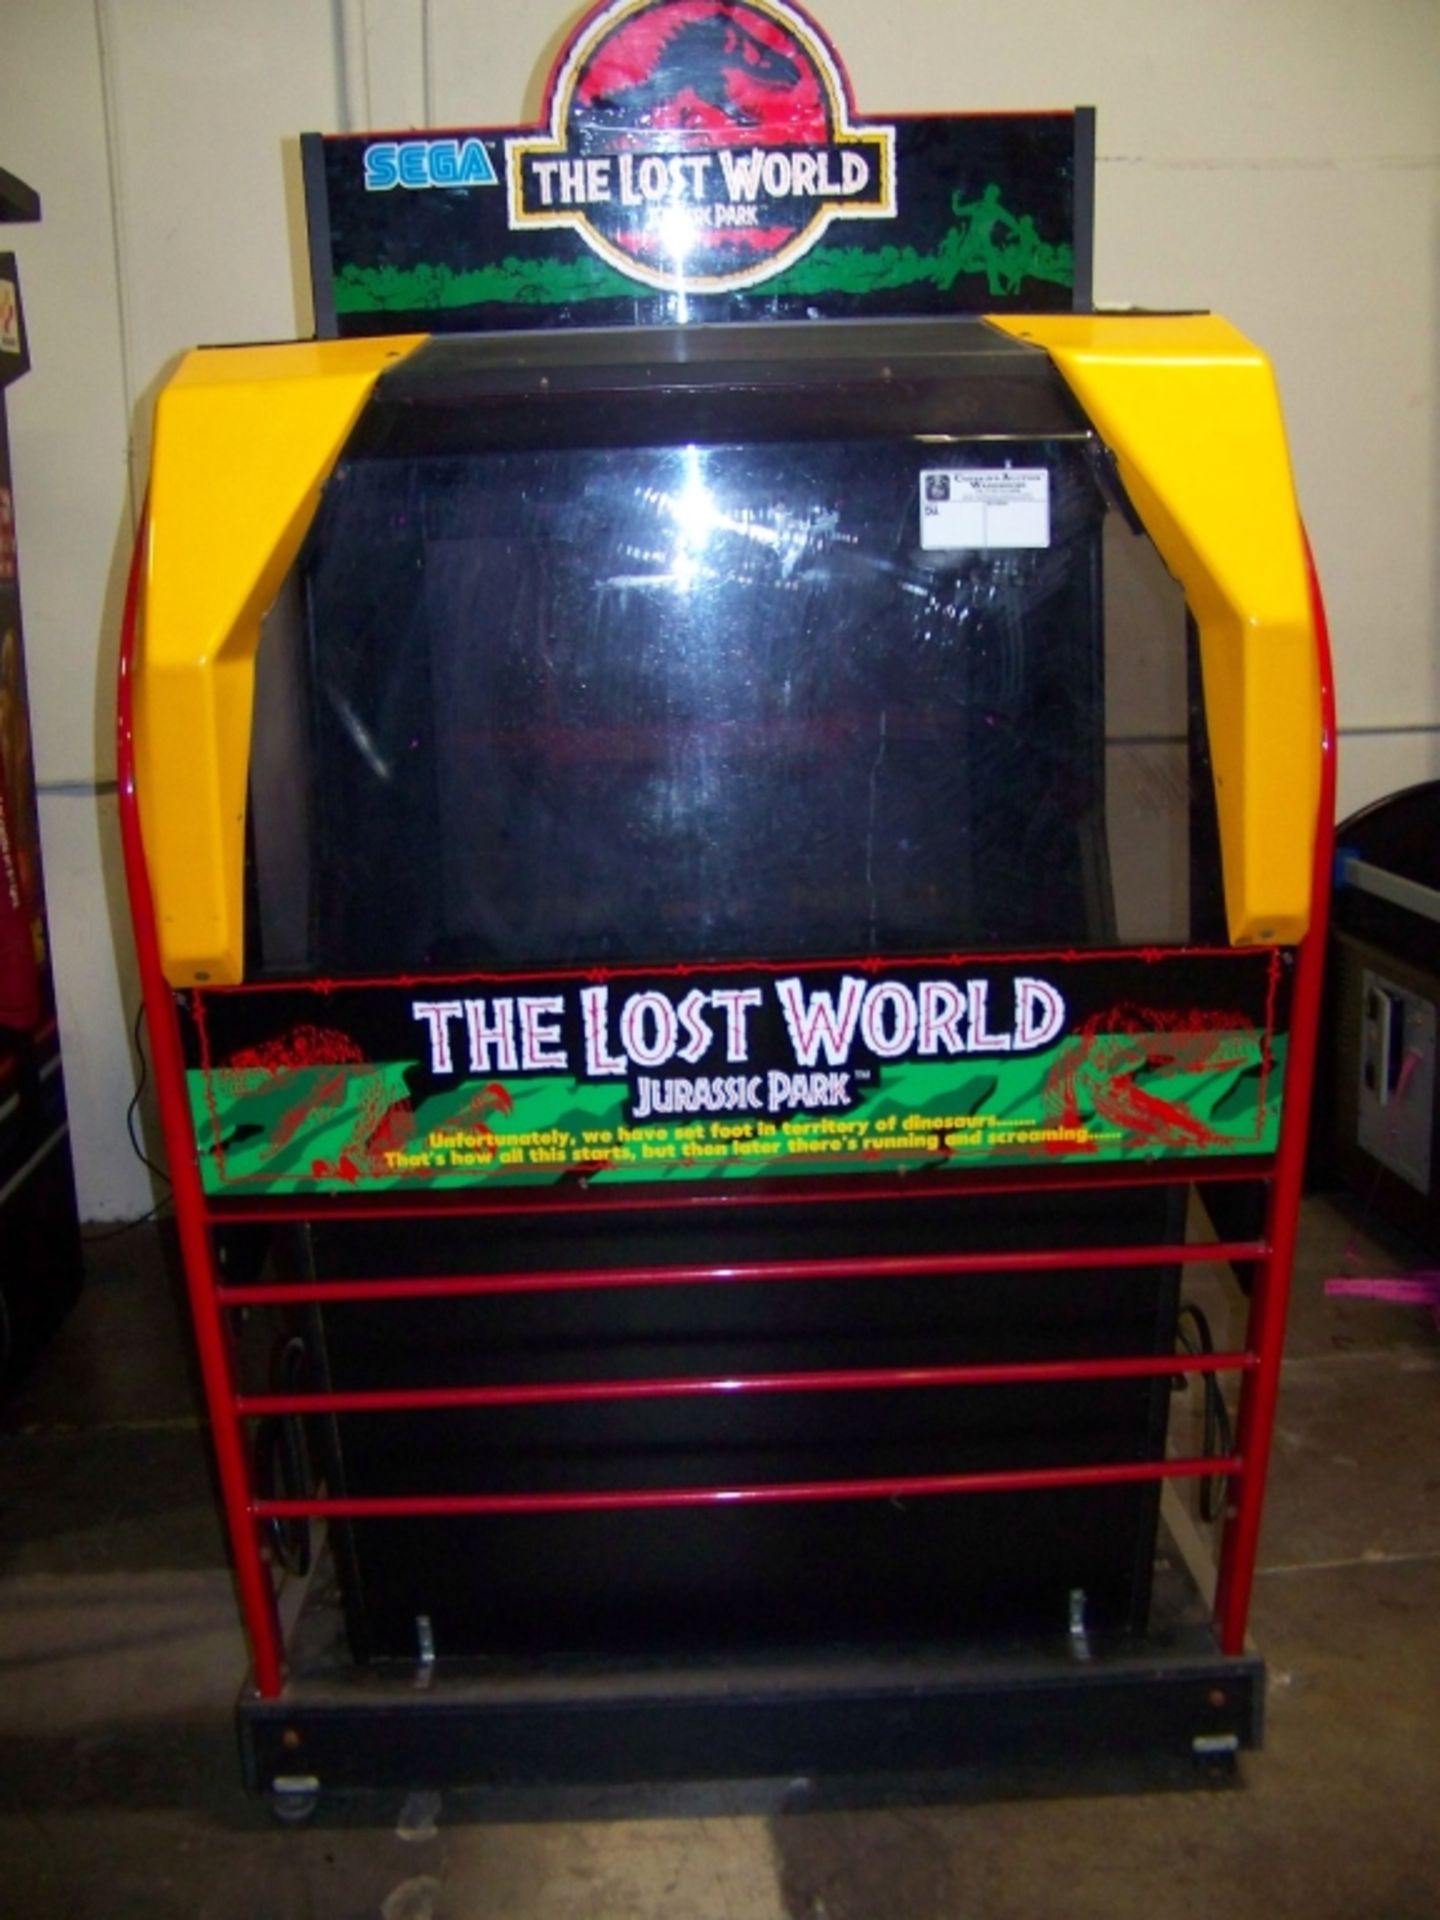 LOST WORLD 50"" ENVIRONMENTAL SHOOTER ARCADE SEGA Item is in used condition. Evidence of wear and - Image 3 of 9